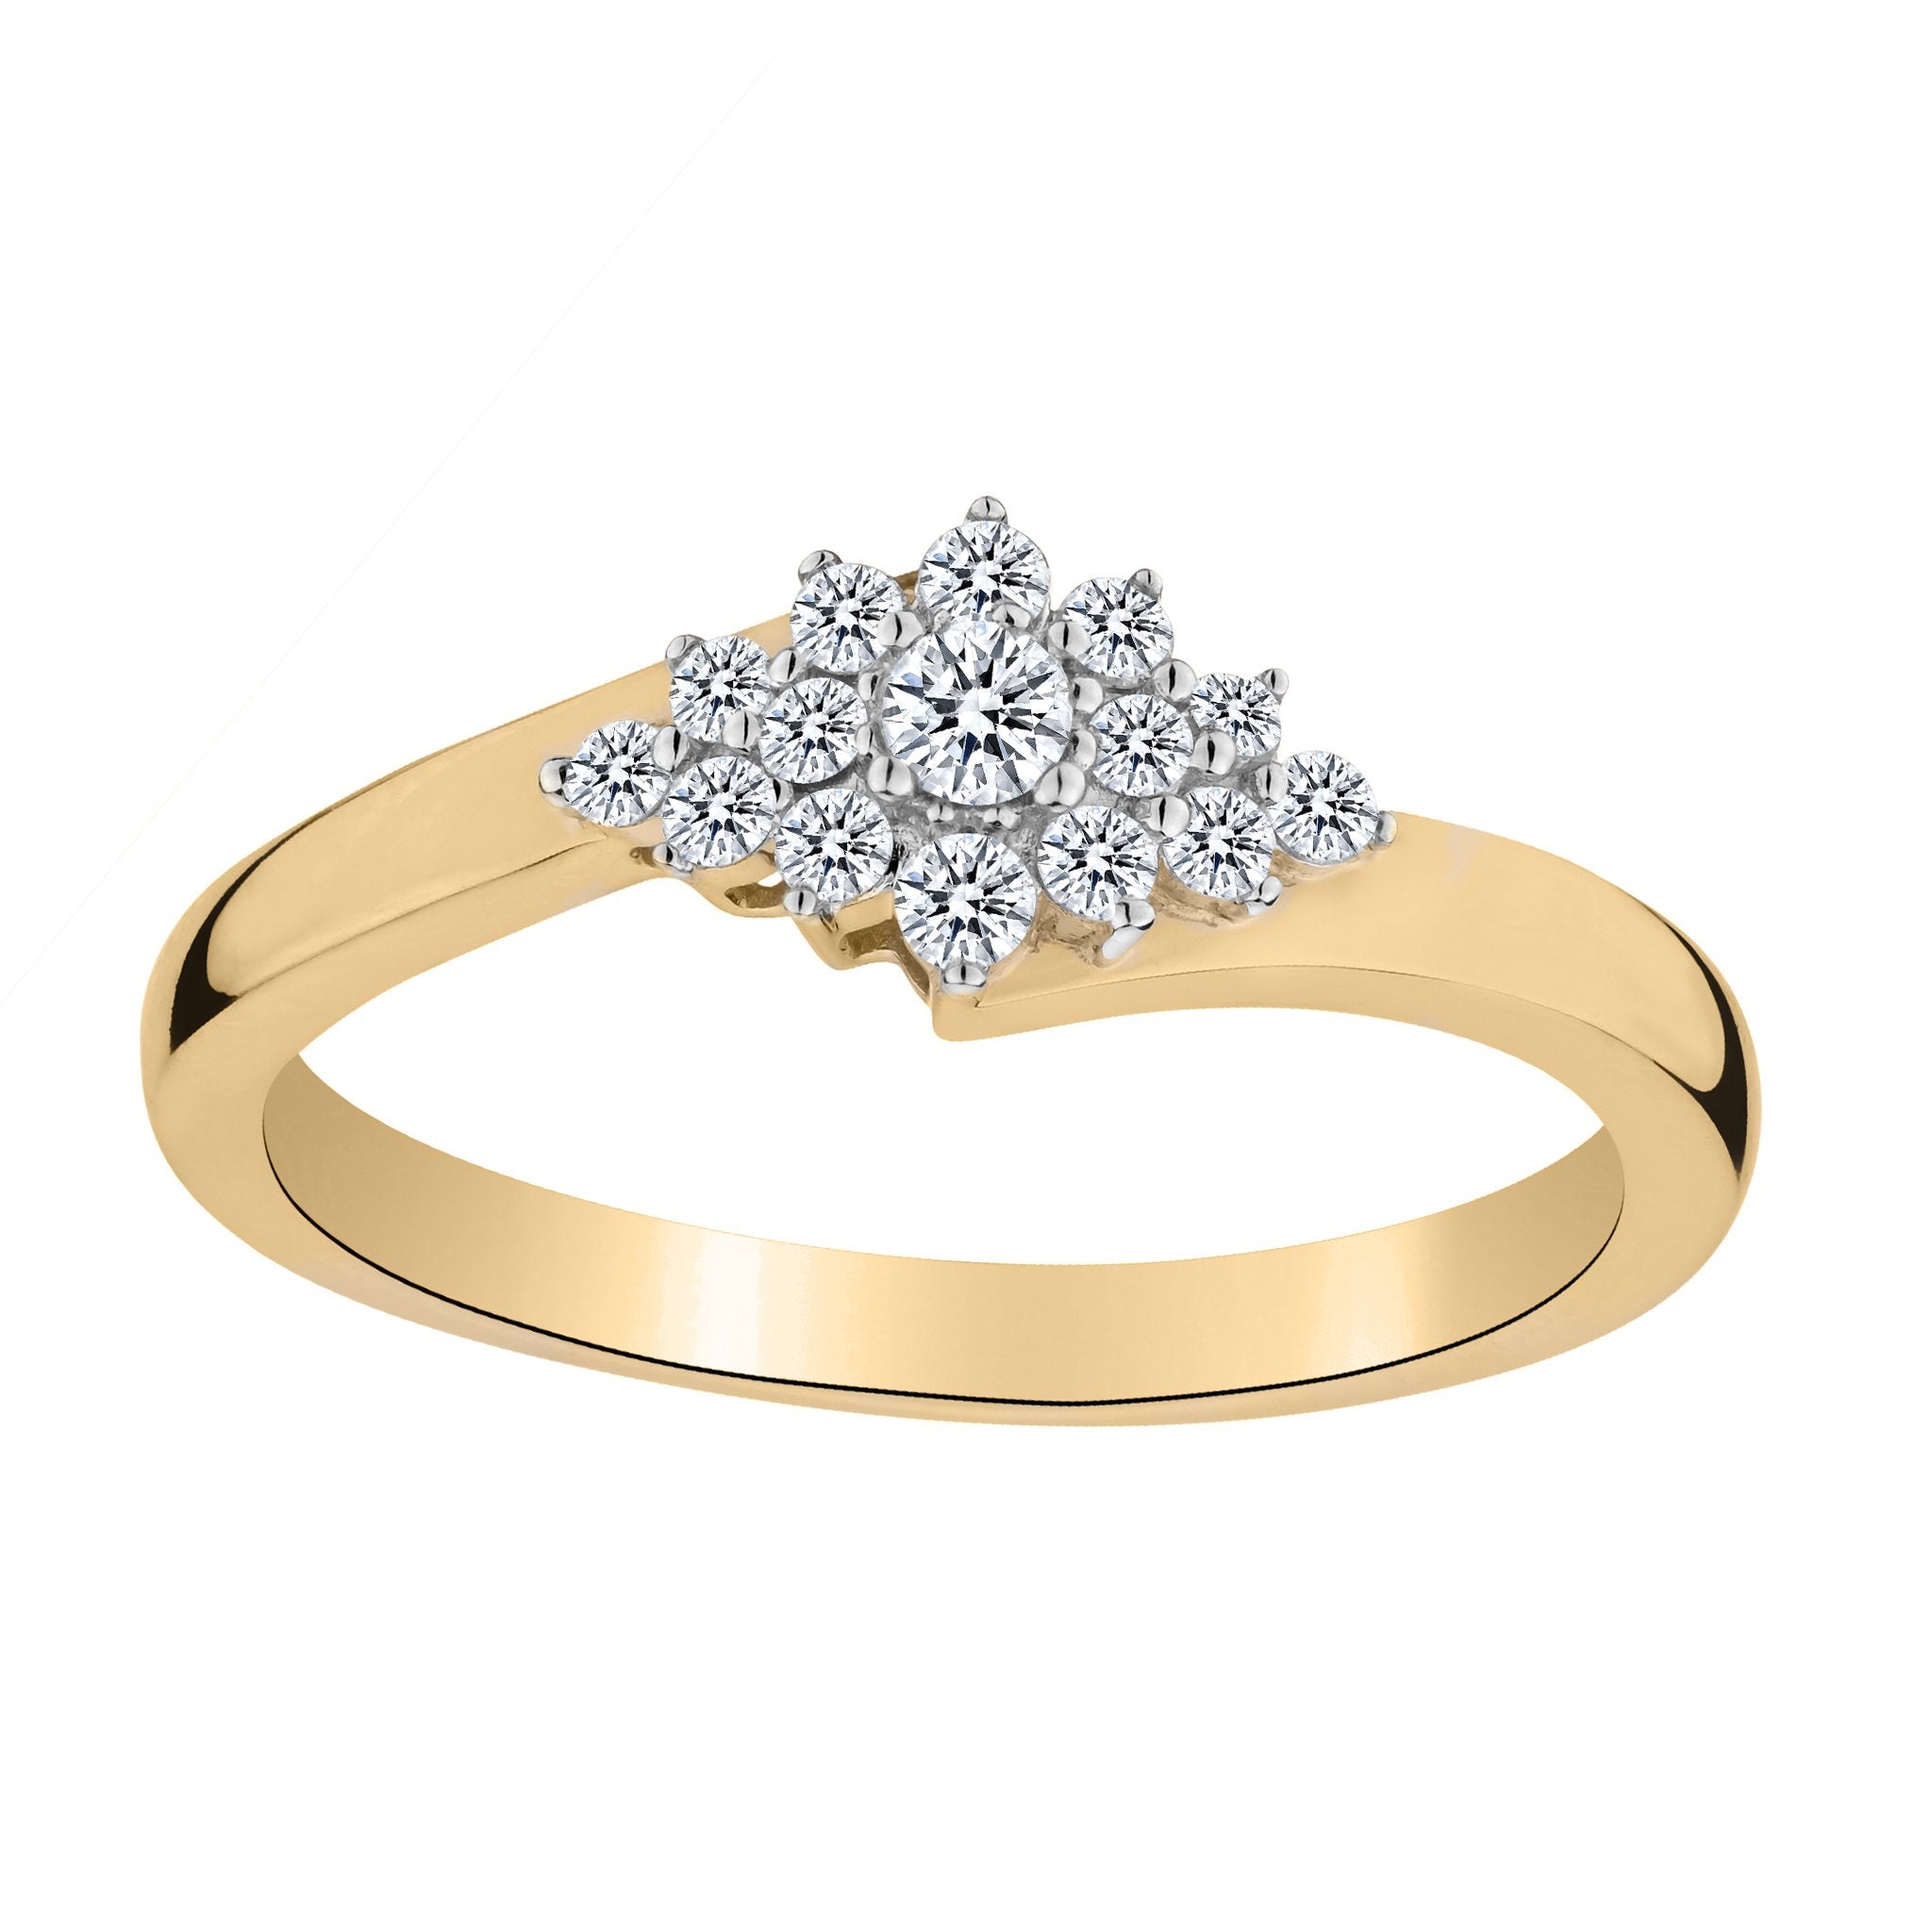 .25 CARAT DIAMOND RING, 10kt YELLOW GOLD. Fashion Rings - Griffin Jewellery Designs